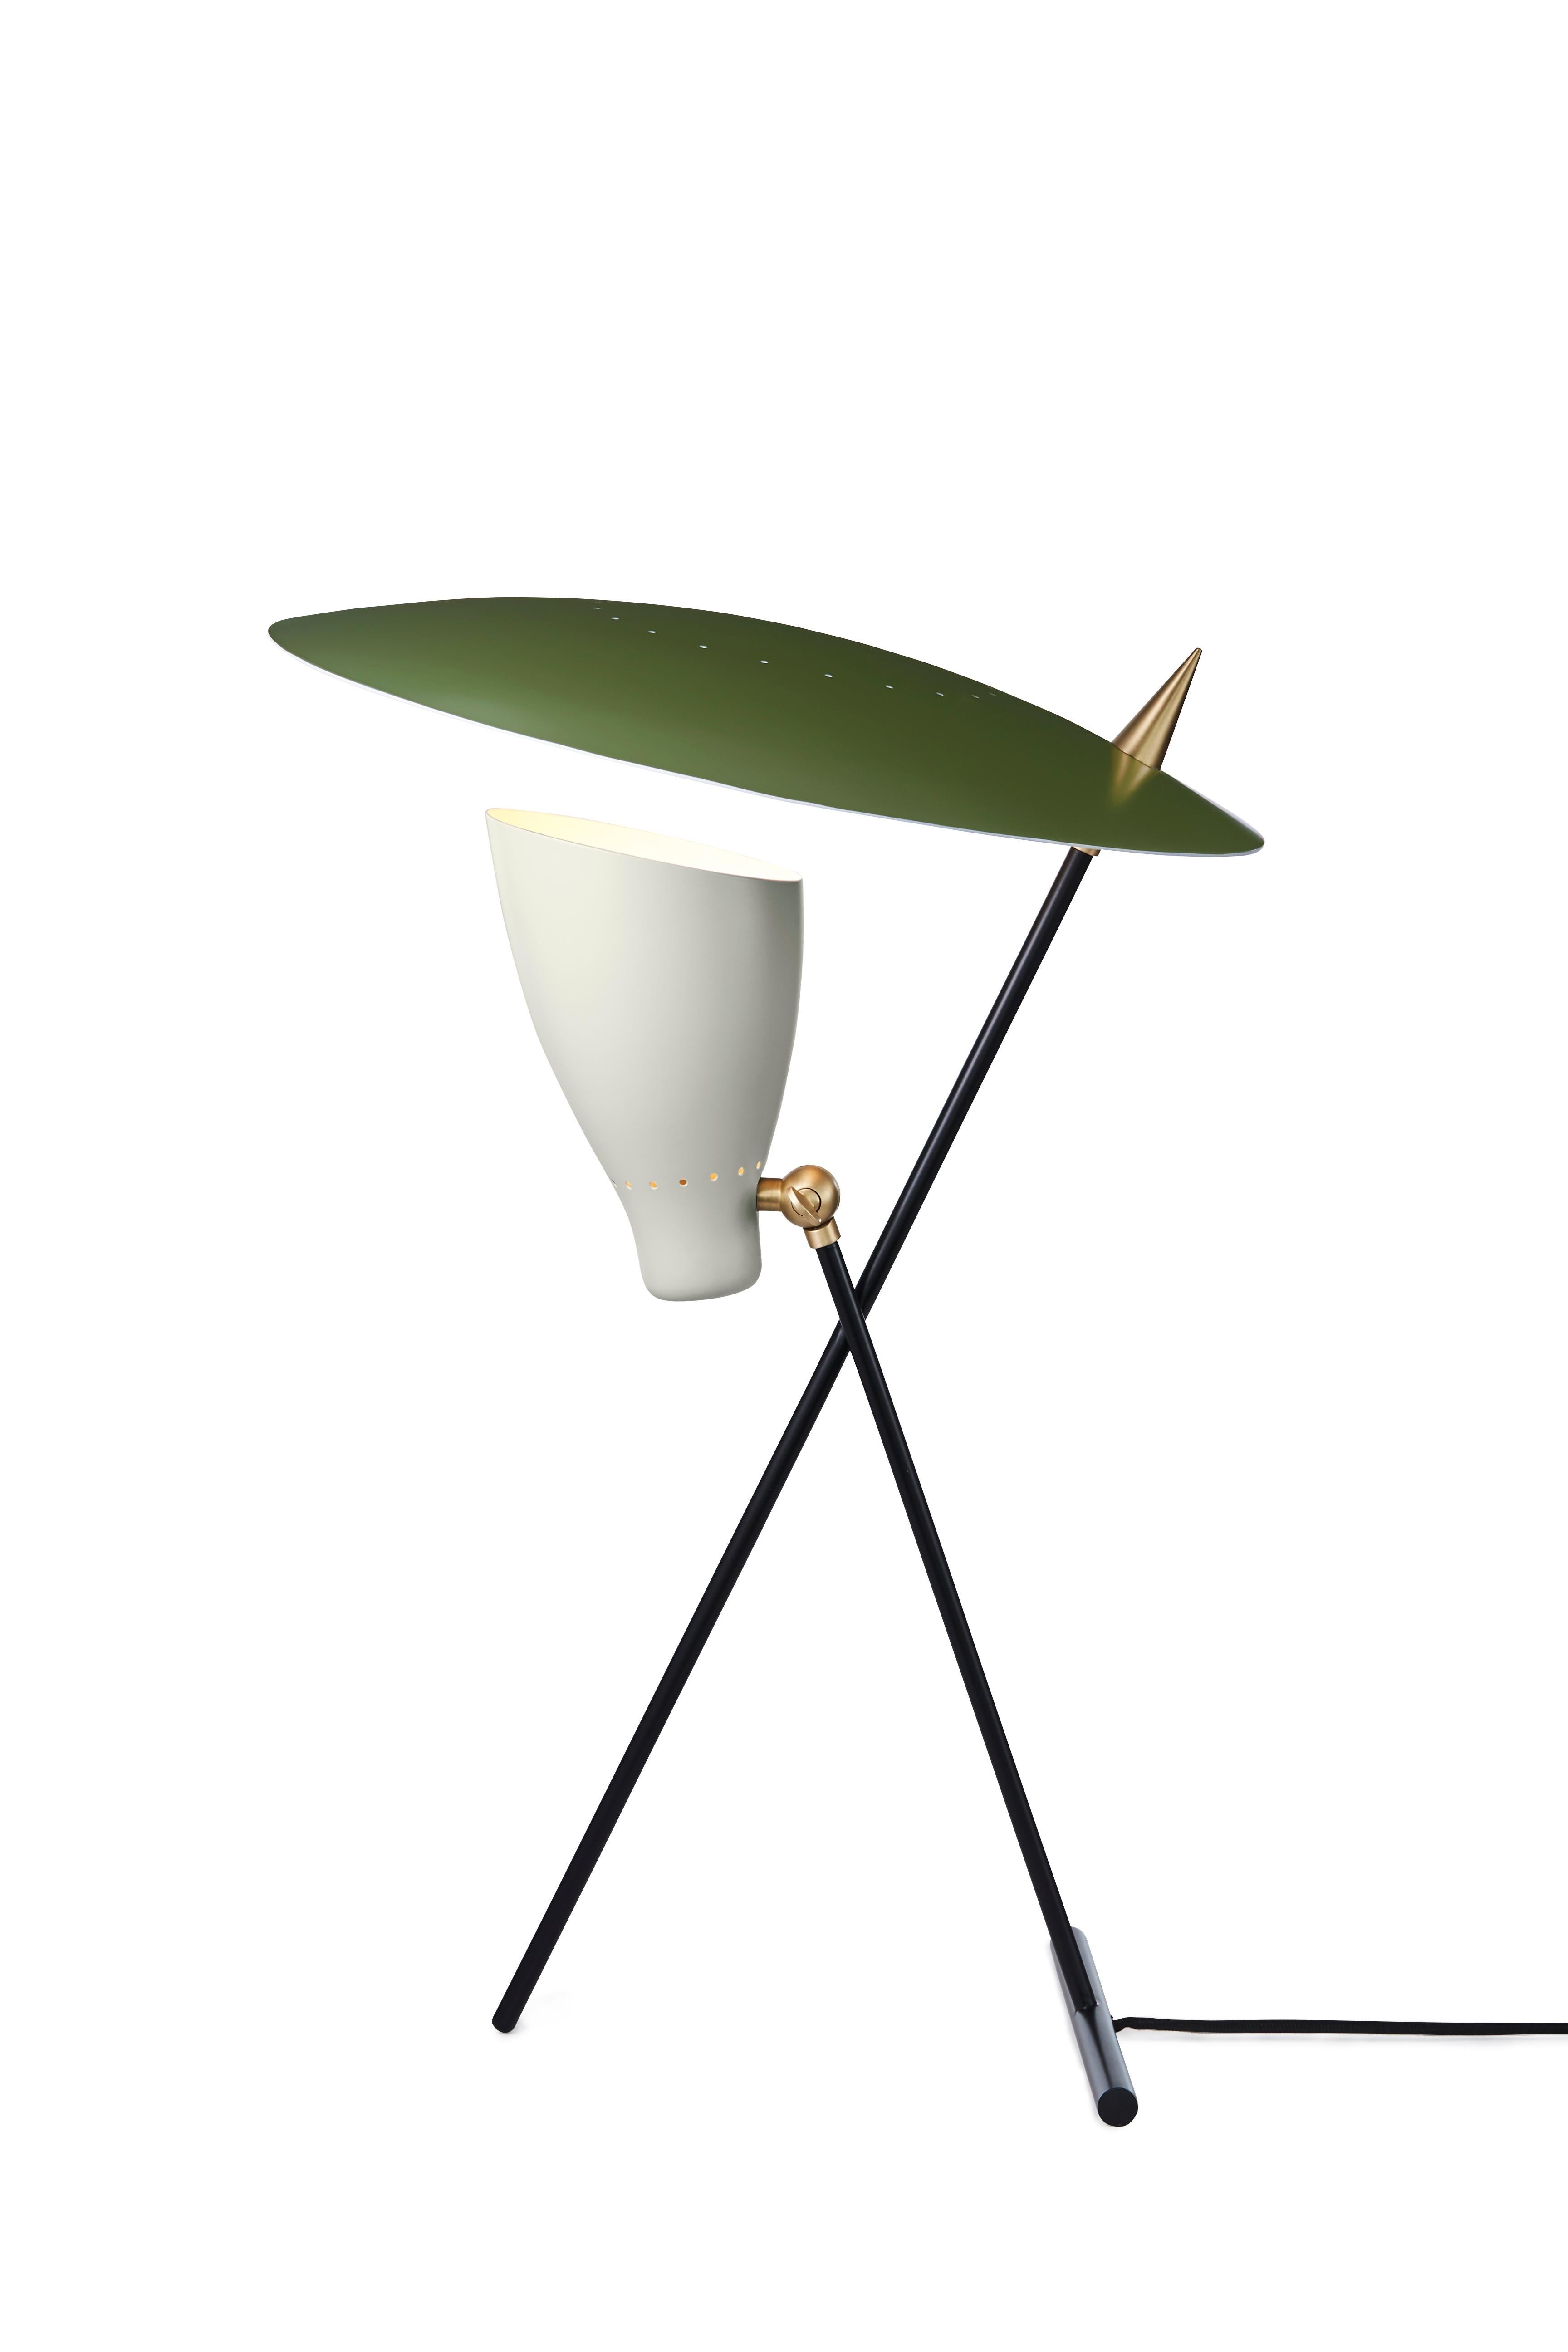 For Sale: Green (Pine Green/Warm White) Silhouette Table Lamp, by Svend Aage Holm-Sørensen from Warm Nordic